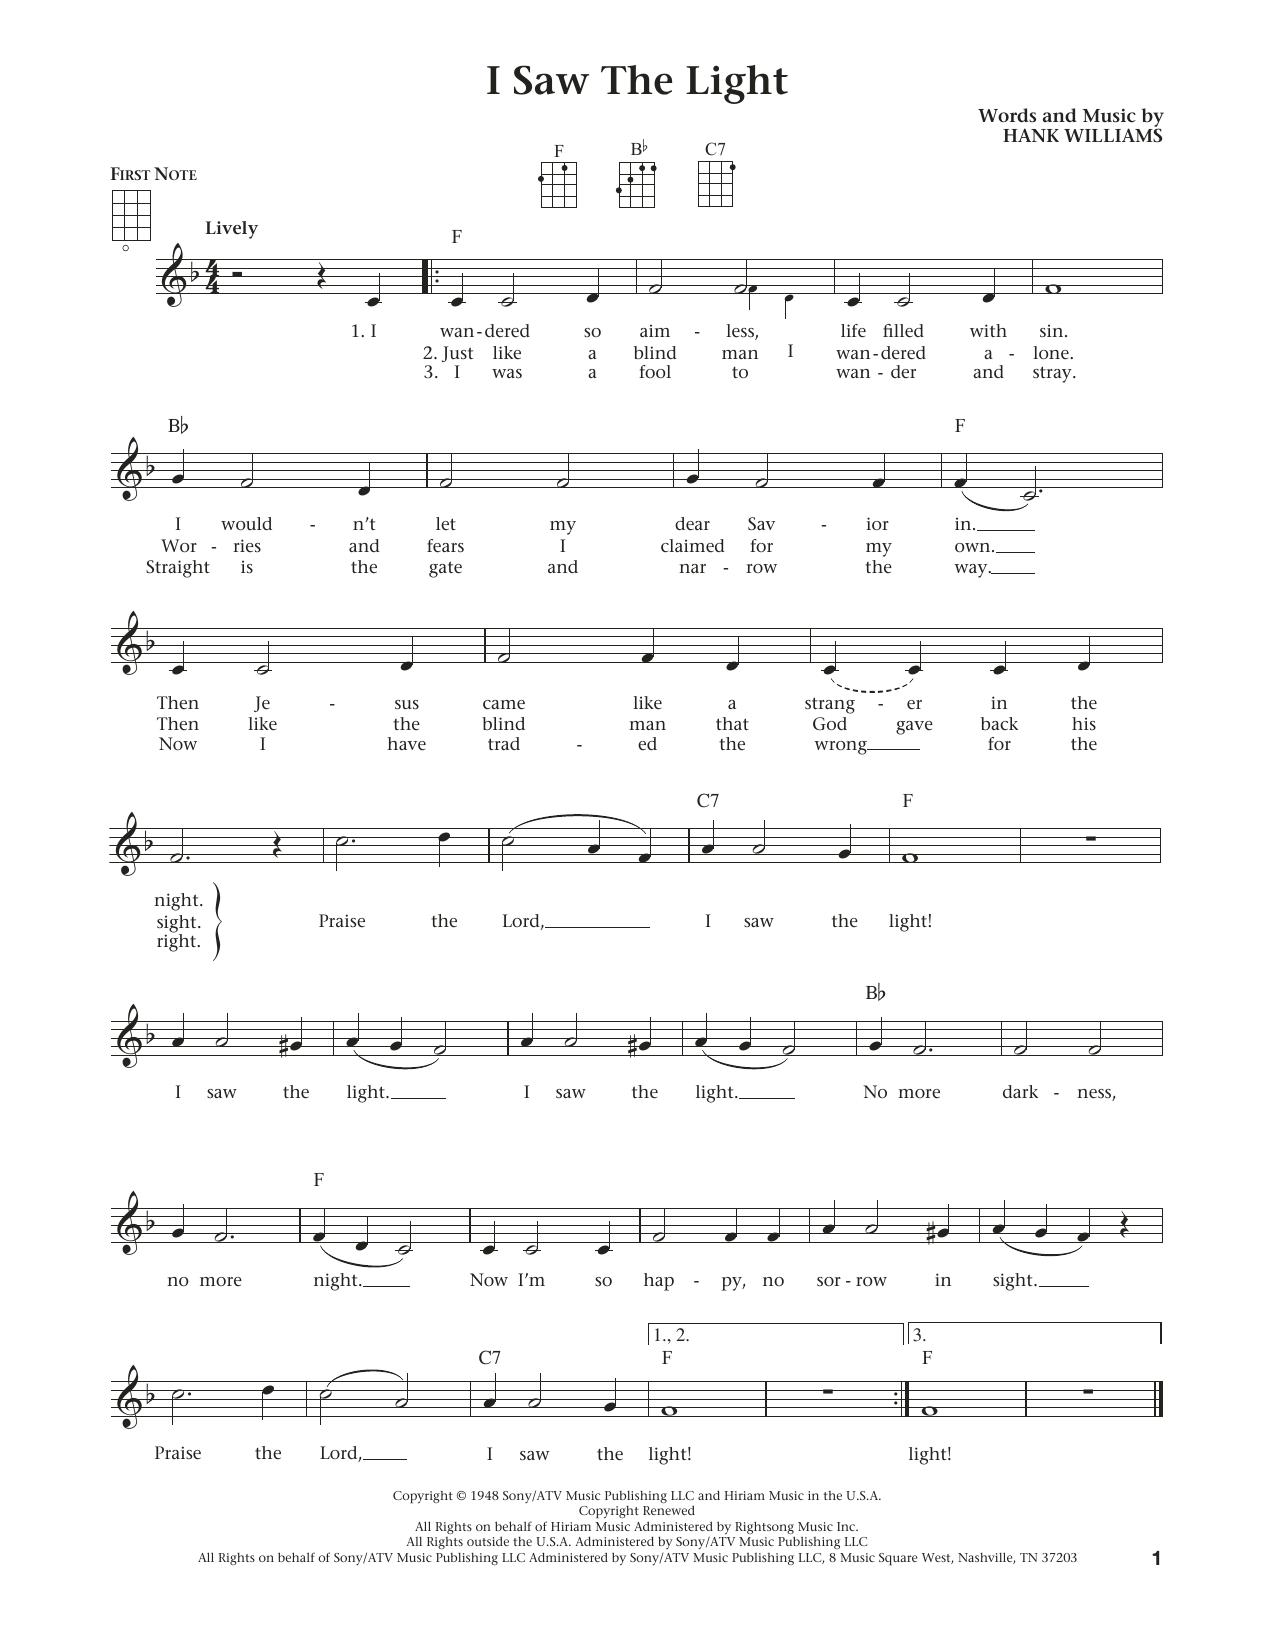 Download Hank Williams I Saw The Light (from The Daily Ukulele Sheet Music